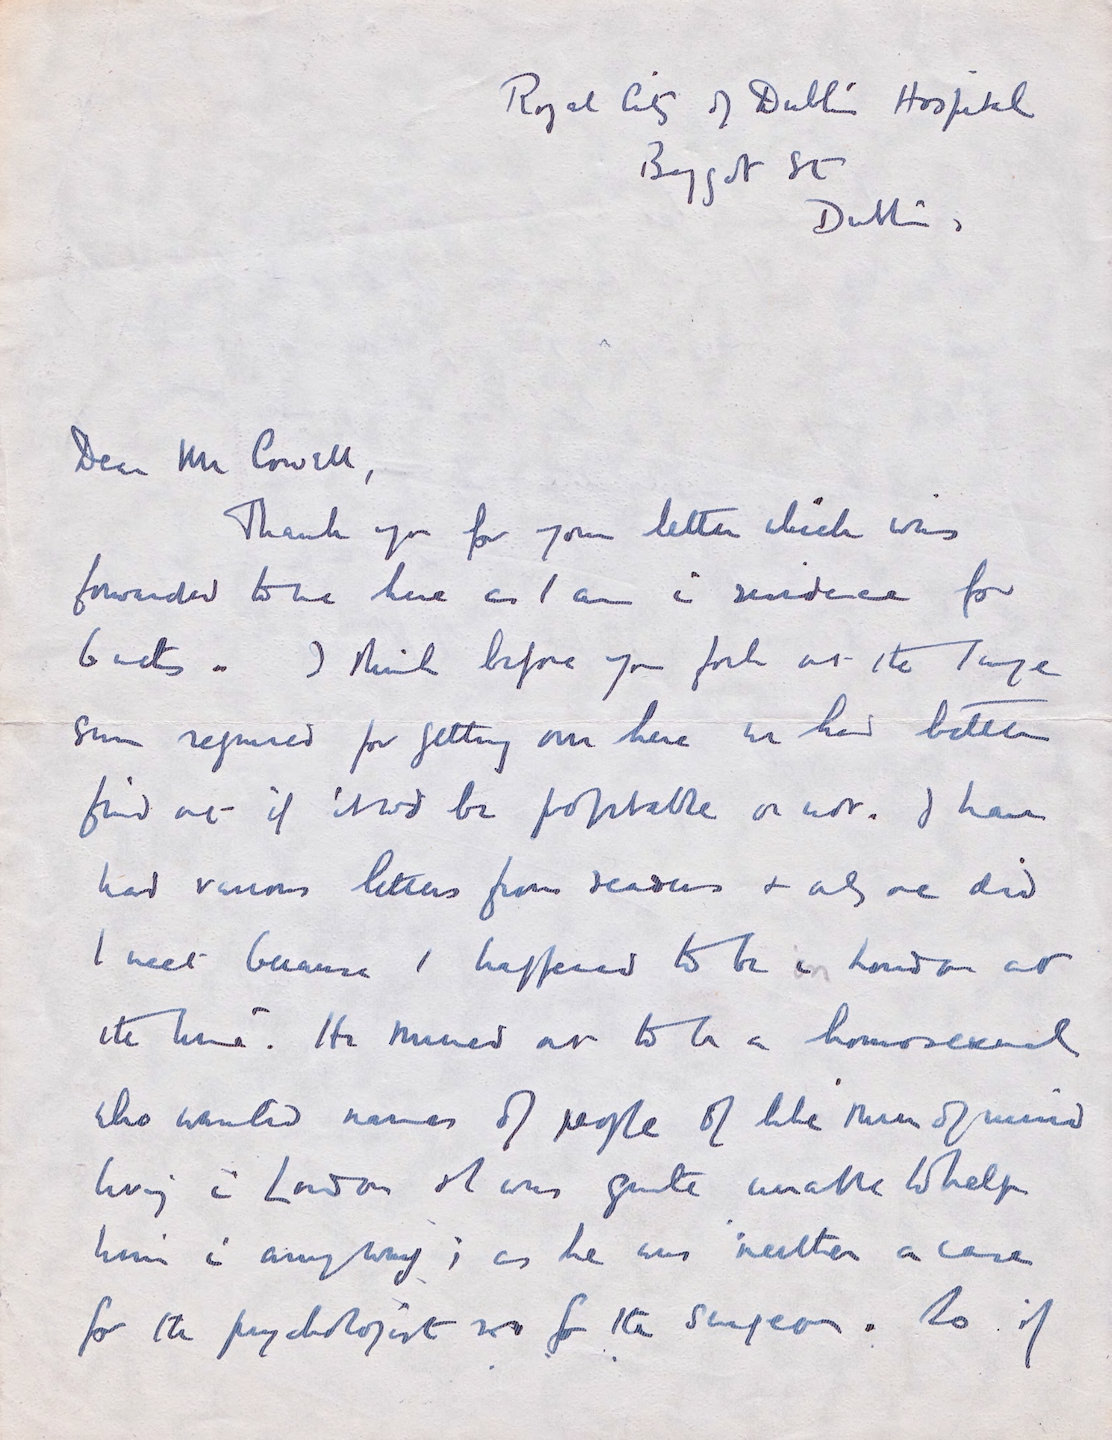 Dillon's first letter to Cowell [Private collection of Liz Hodgkinson]